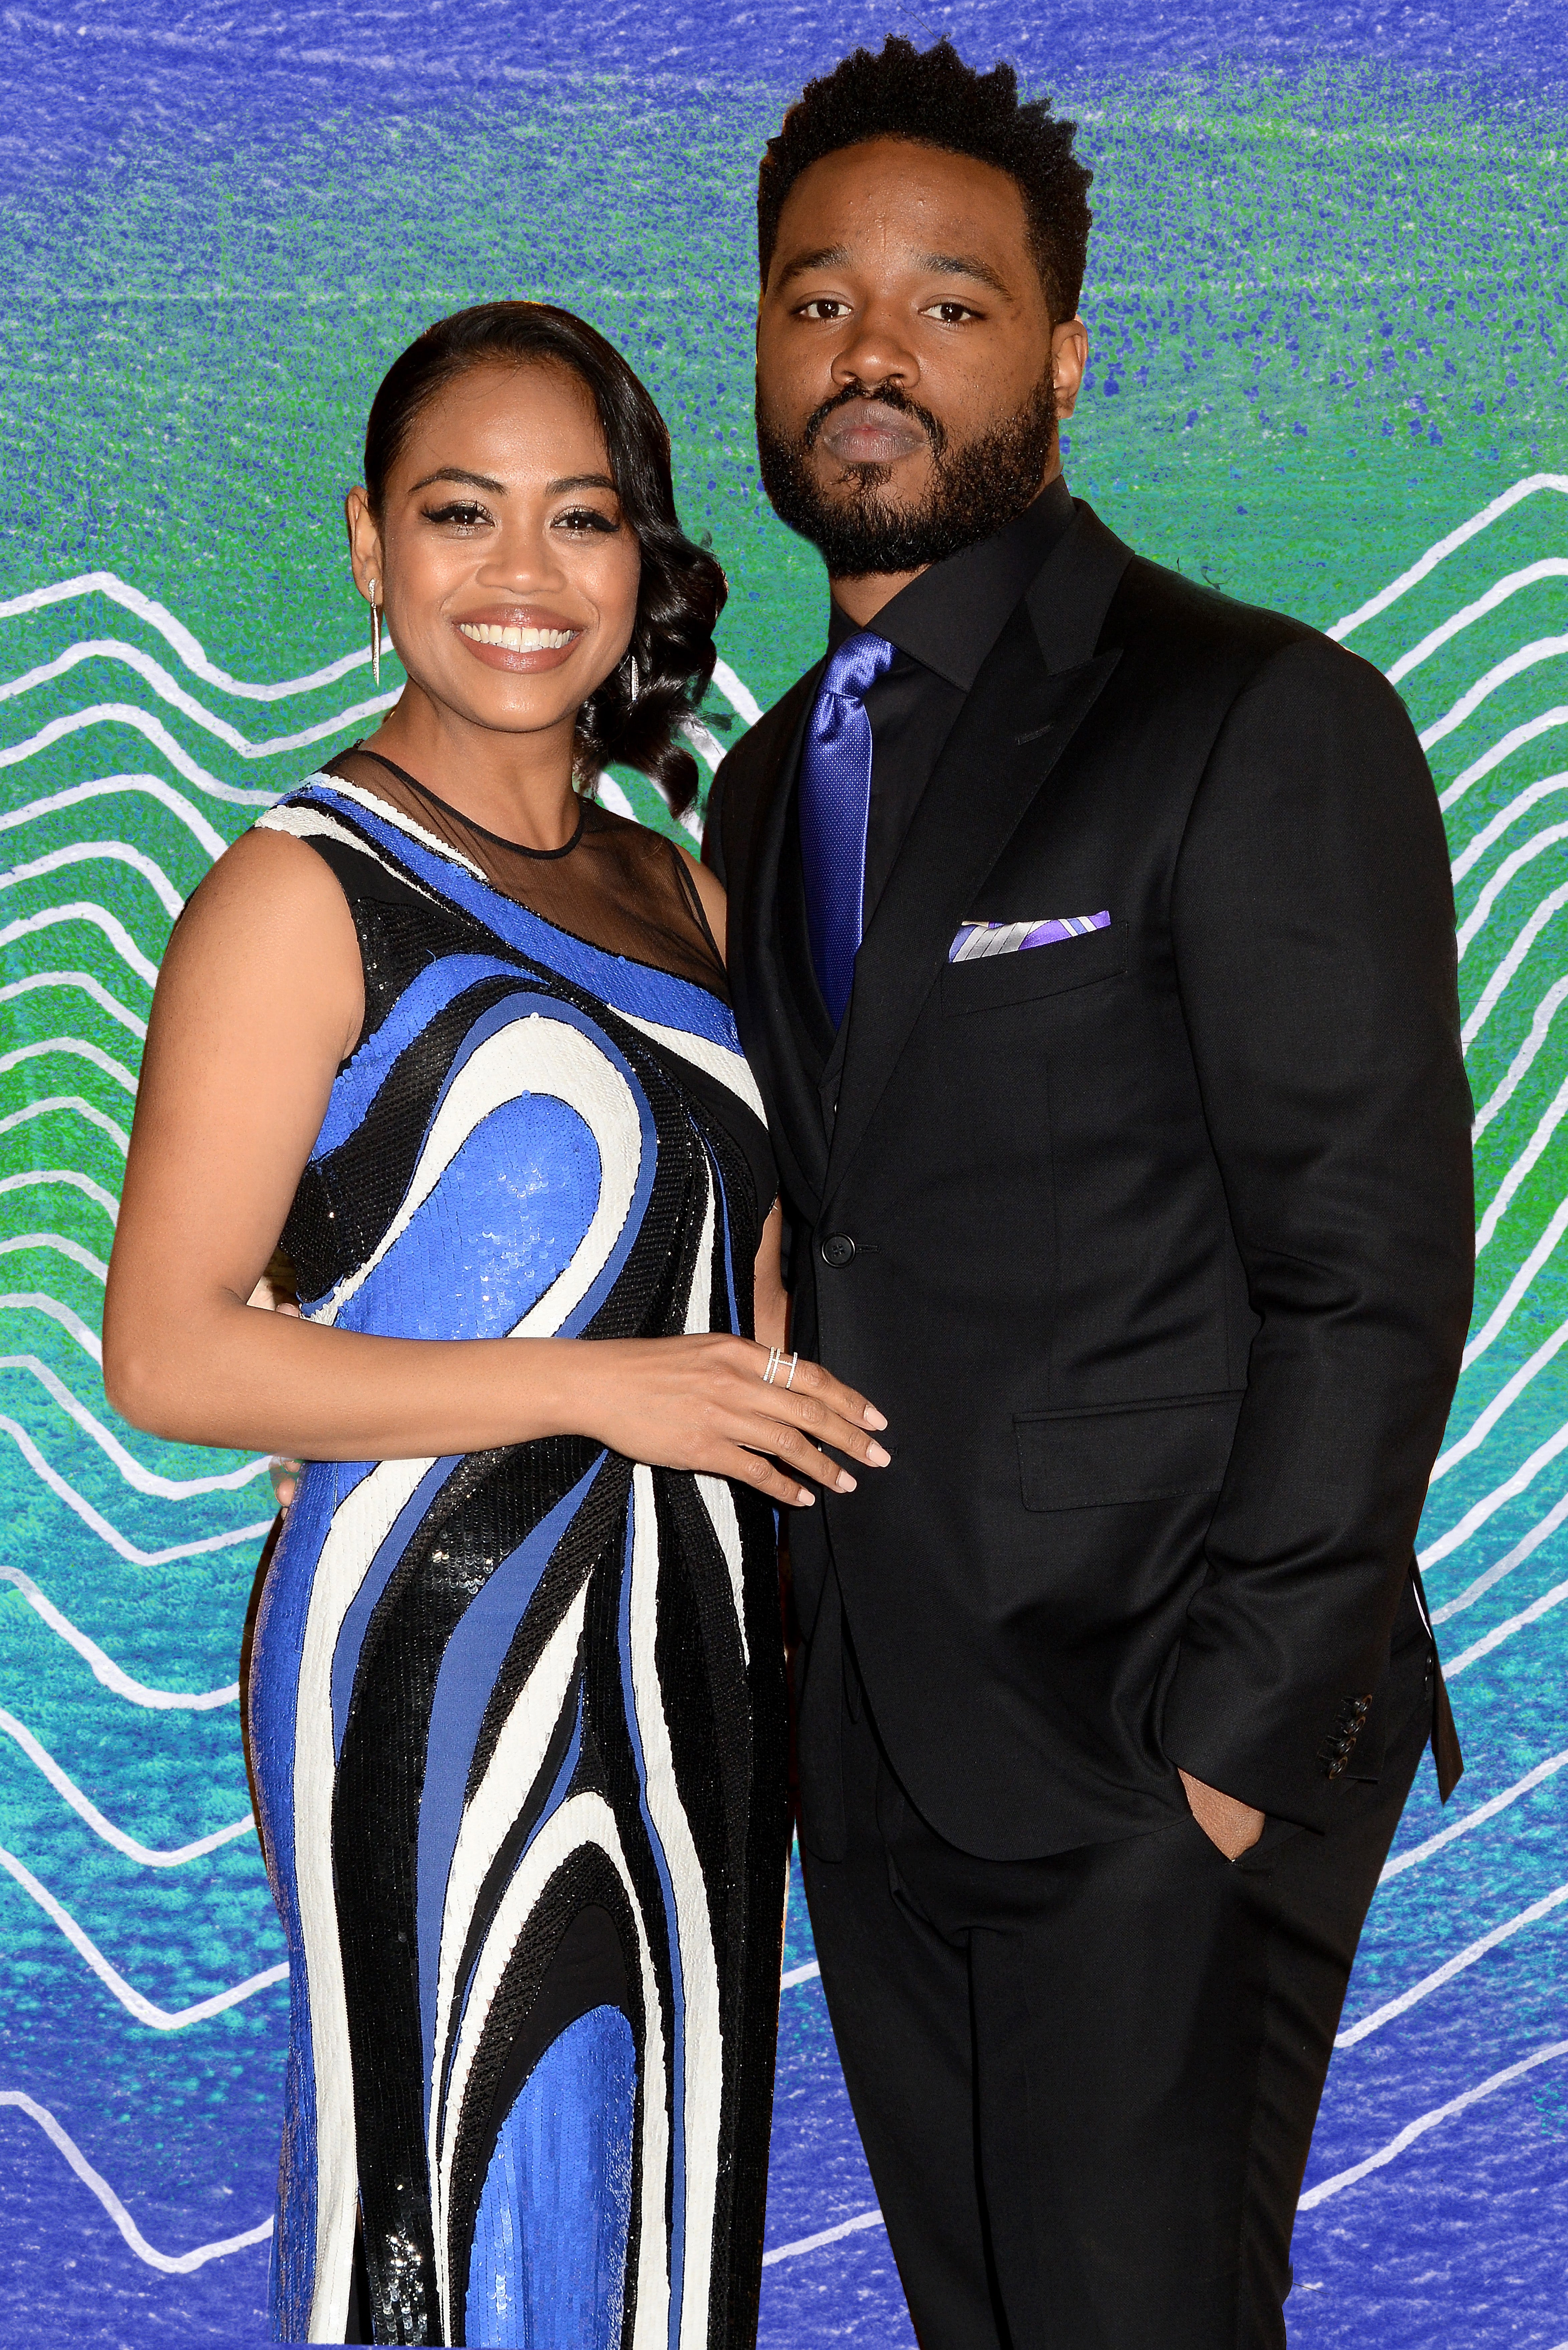 10 Adorable Photos Of 'Black Panther' Director Ryan Coogler And Wife Zinzi Evans That Will Make You Feel The Love
